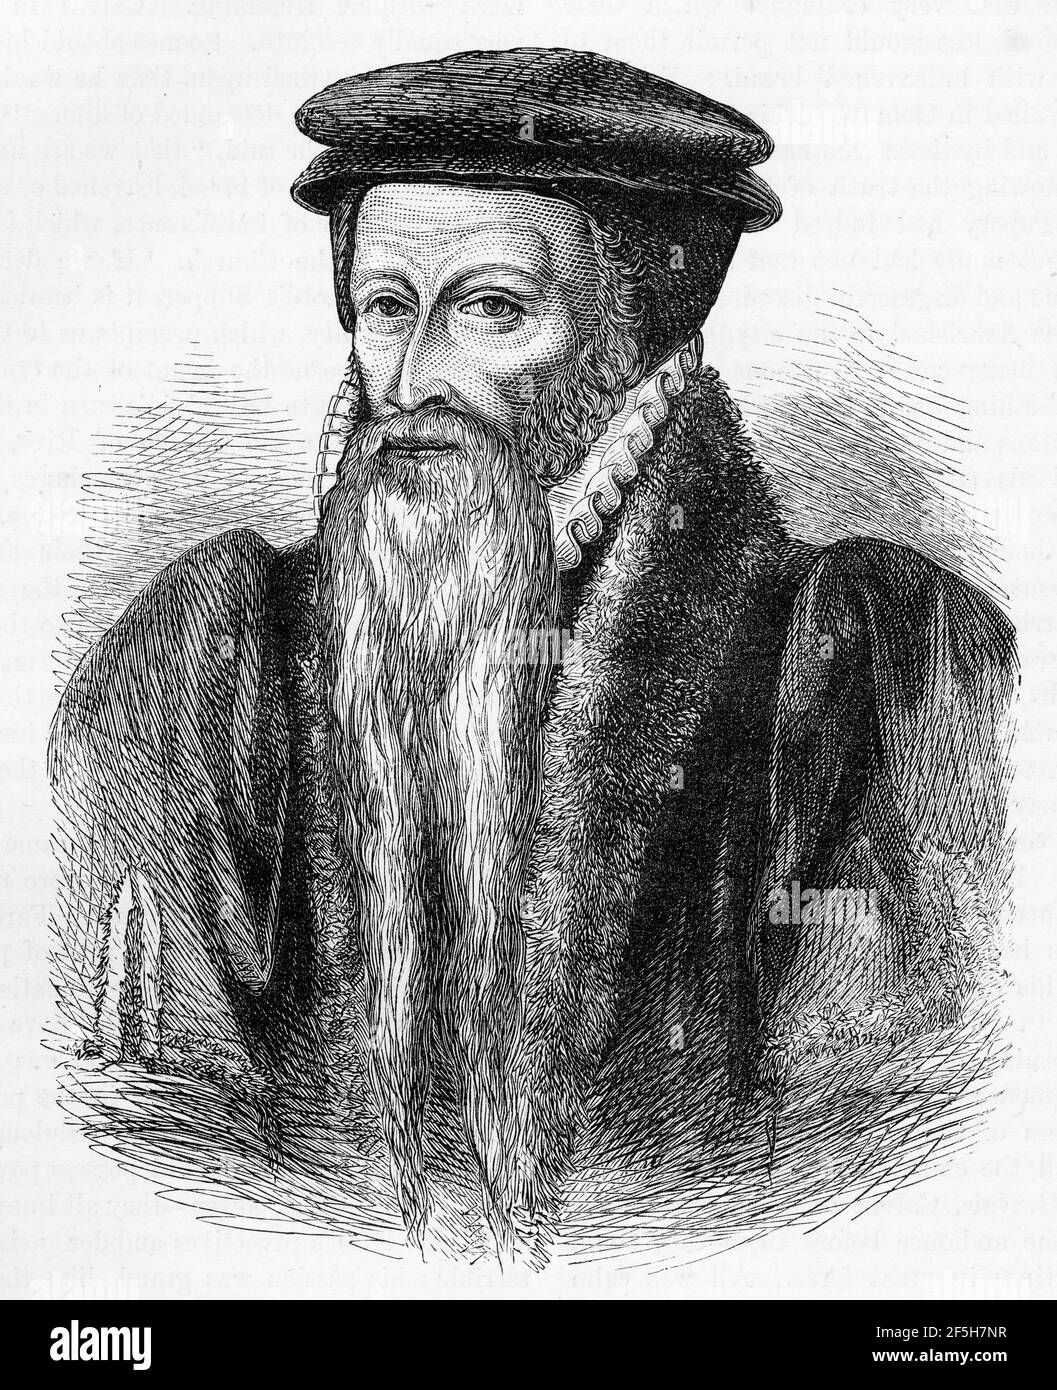 Engraving of Theodore Beza (1519 – 1605) a French Reformed Protestant theologian, reformer and scholar who played an important role in the Reformation. He was a disciple of John Calvin and lived most of his life in Geneva. Stock Photo